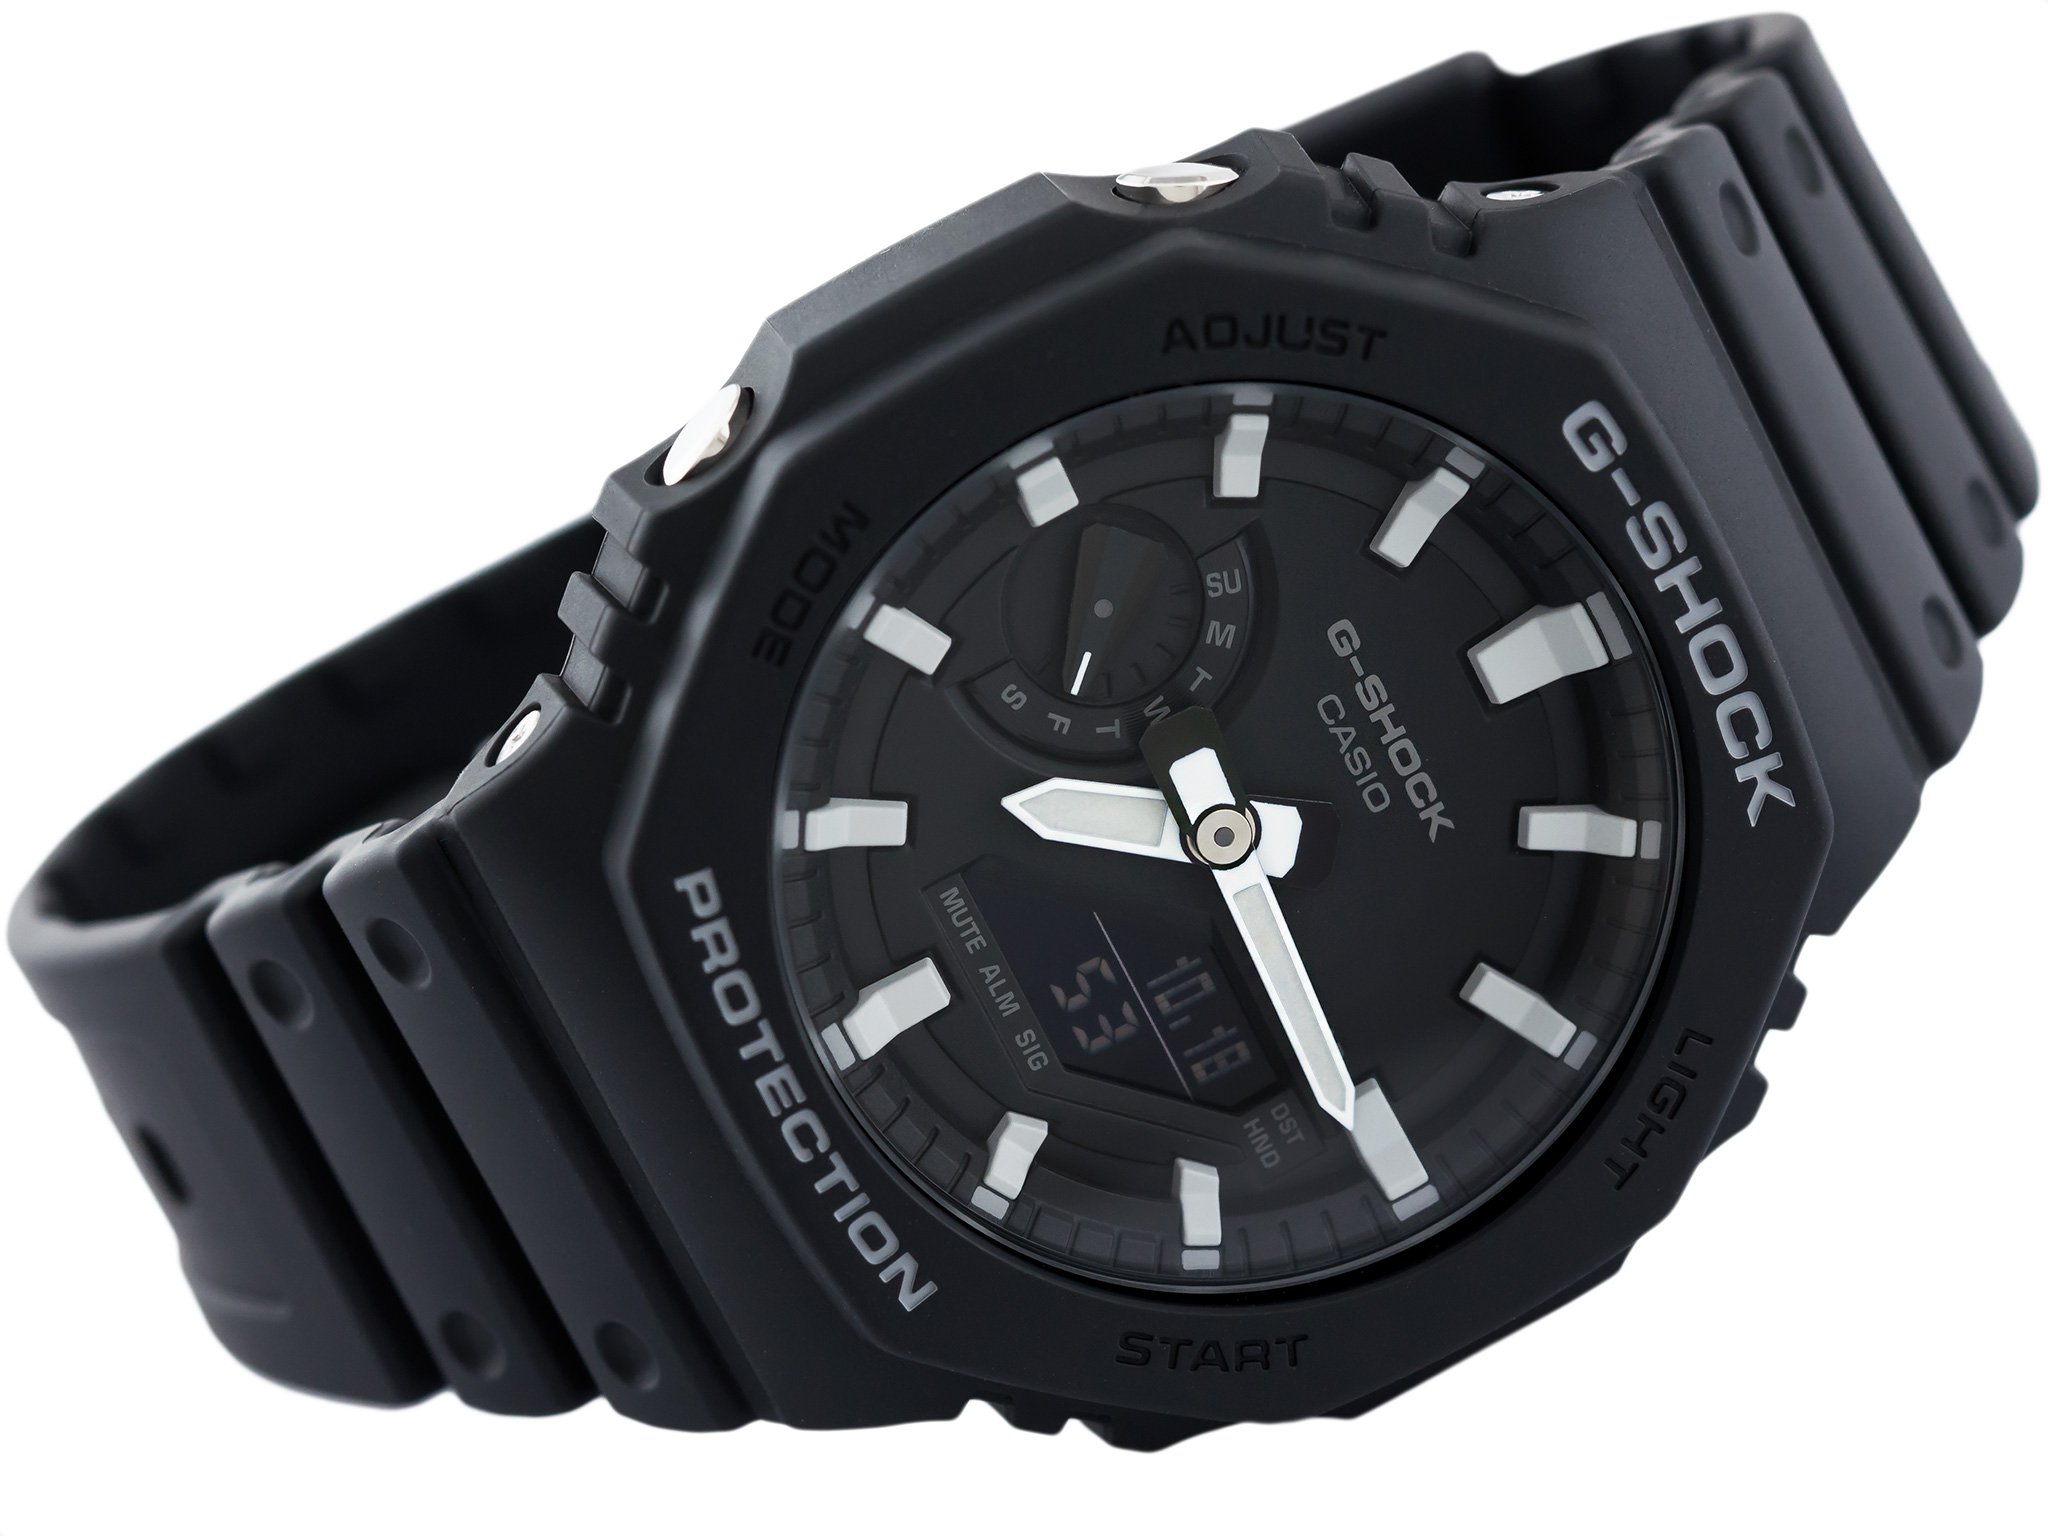 Casio G-Shock GA-2100 1A Review & Complete Guide - Millenary Watches